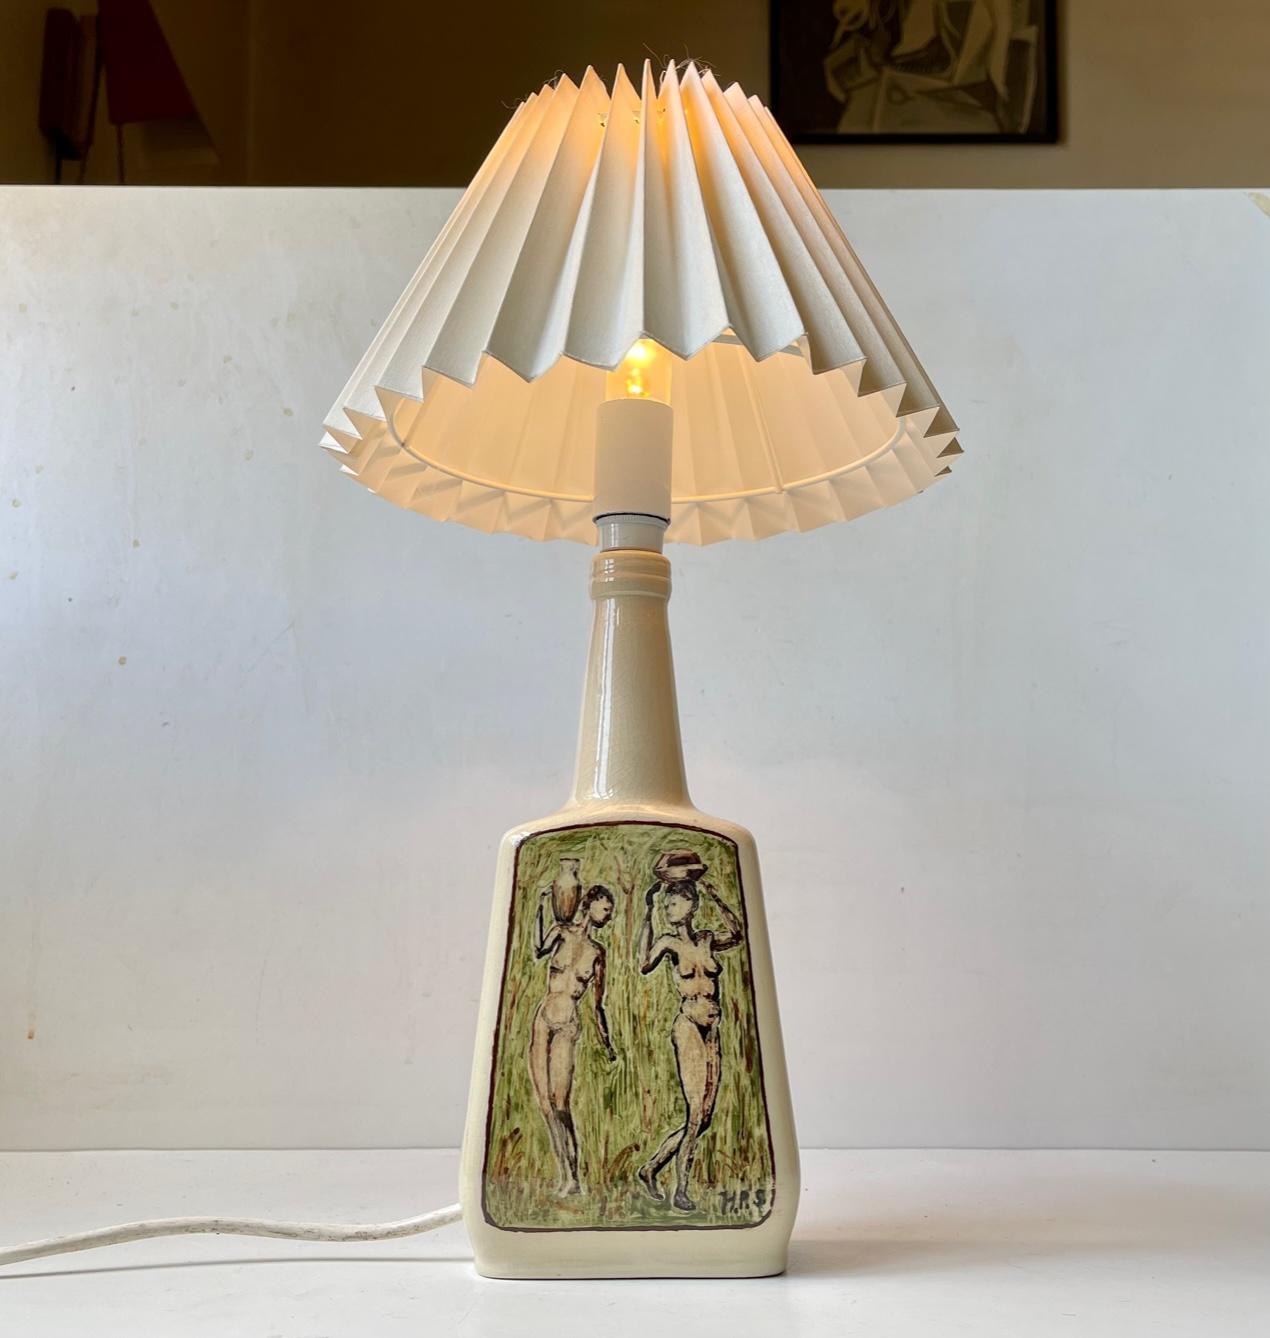 Hand-painted Ceramic Table Lamp with Naked African Woman, 1970s For Sale 1